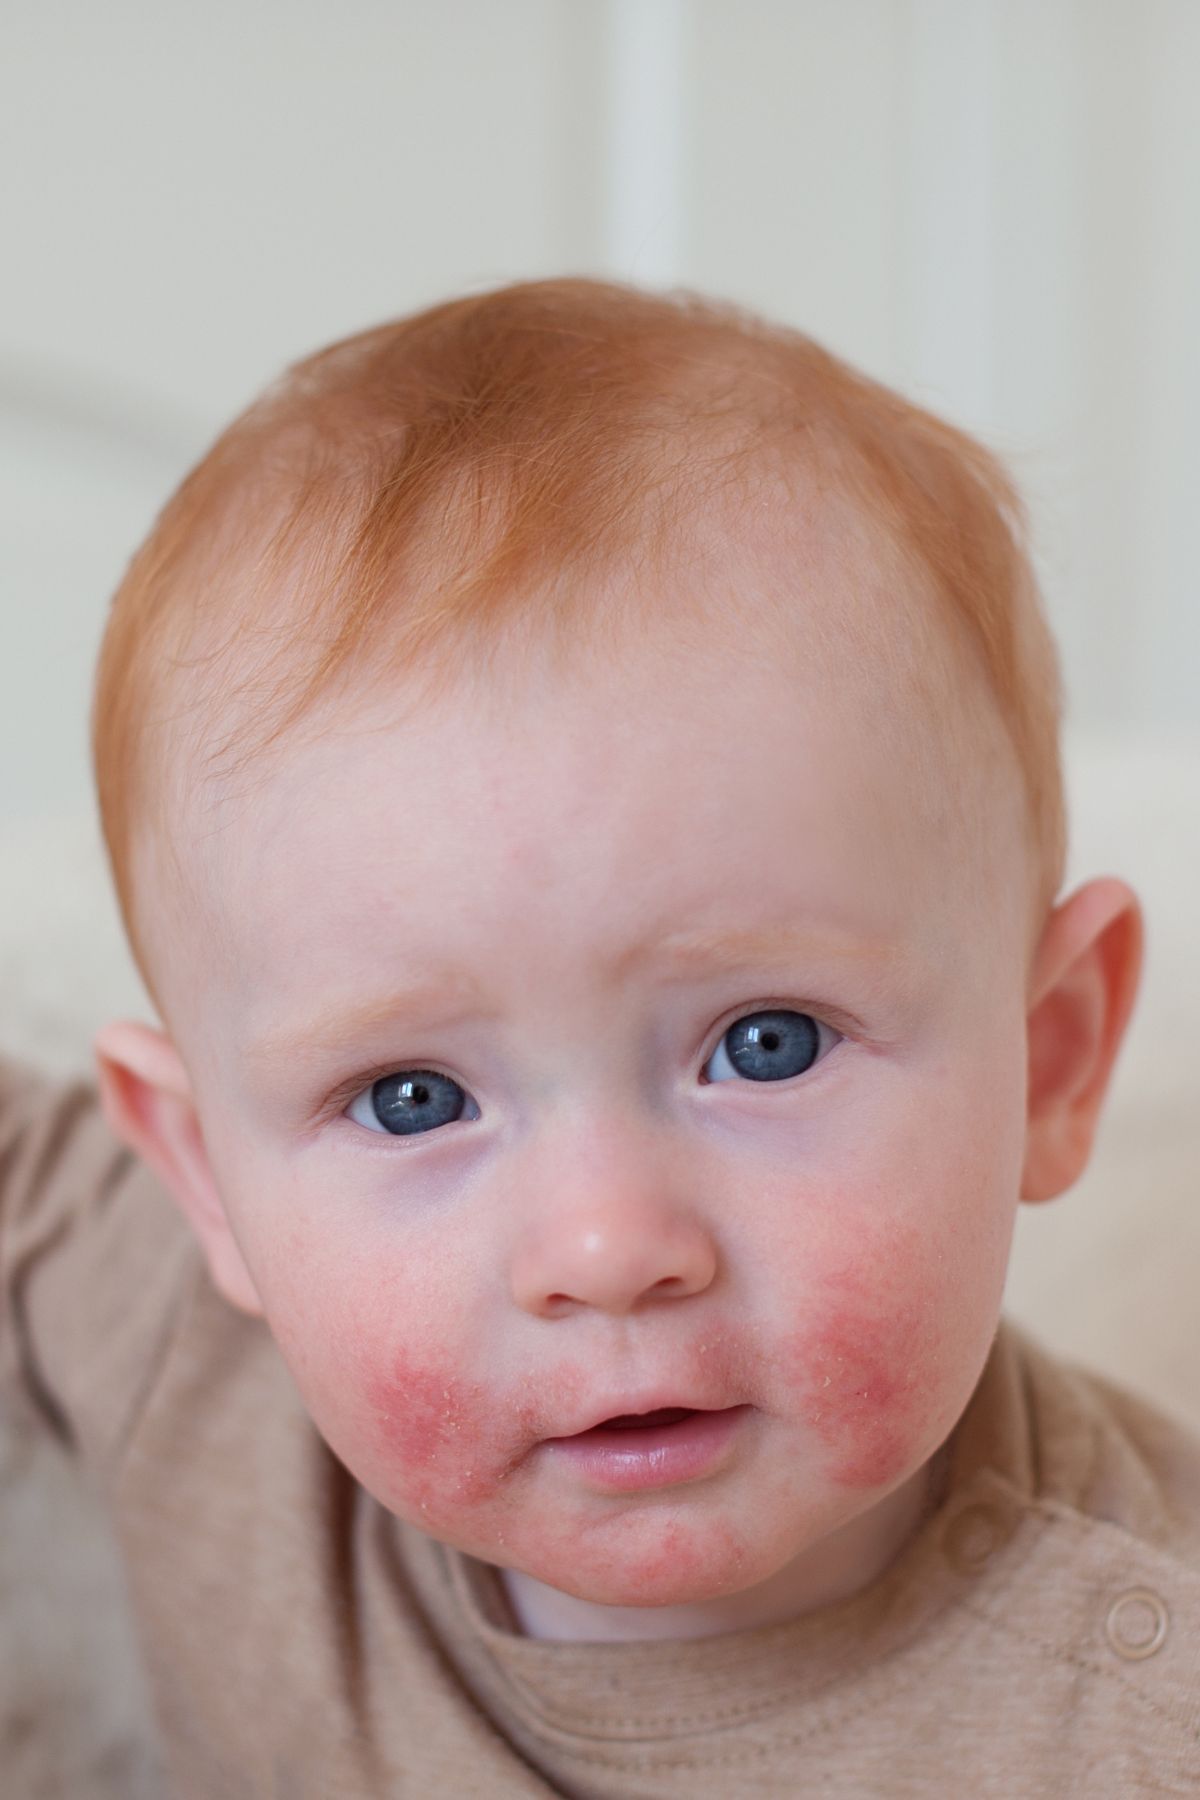 A redheaded toddler boy with an allergic rash around his mouth and cheeks.